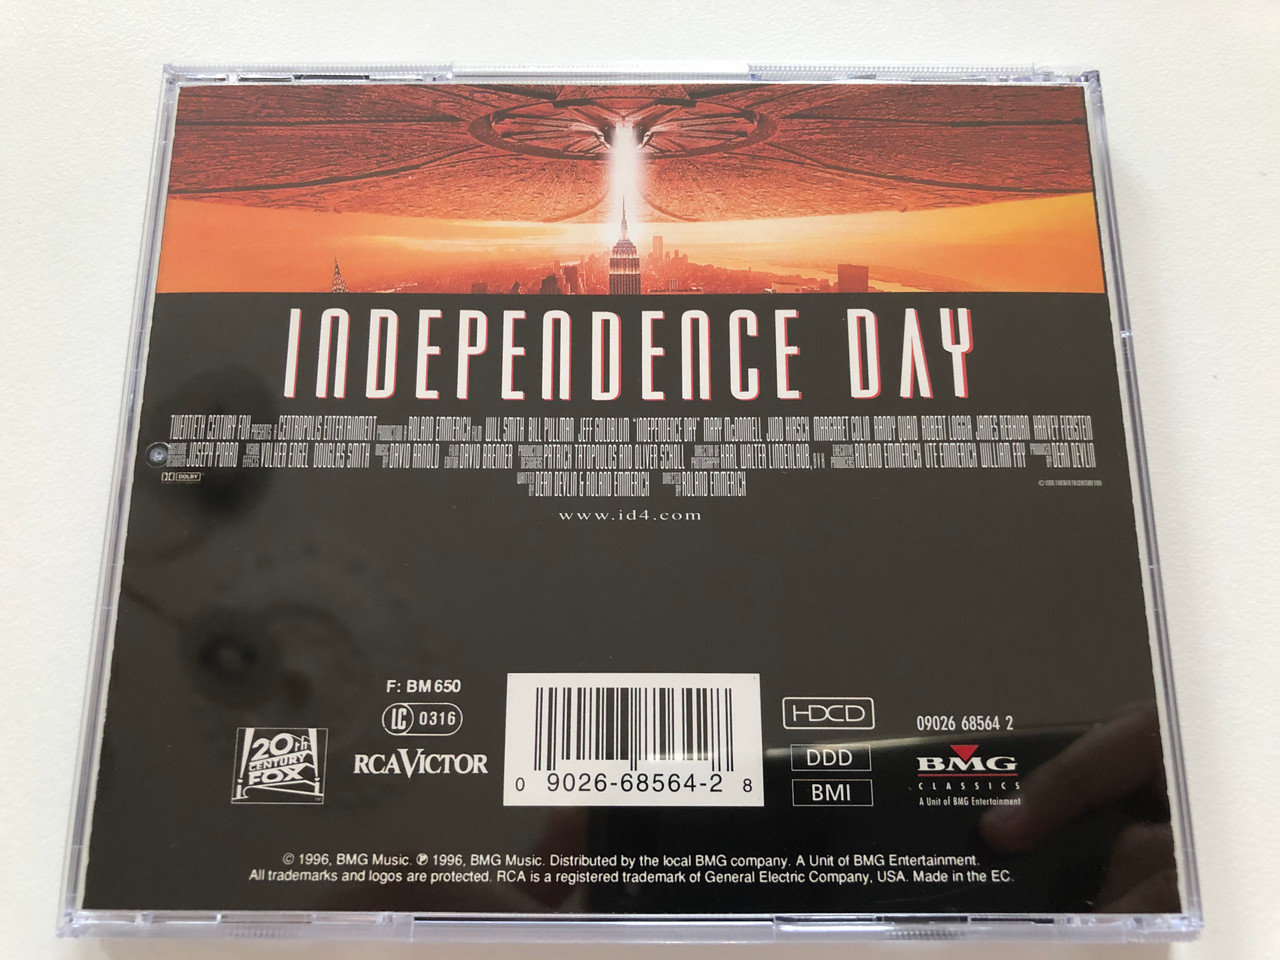 https://cdn10.bigcommerce.com/s-62bdpkt7pb/products/31181/images/183556/Independence_Day_Original_Soundtrack_Recording_-_Music_by_David_Arnold_RCA_Victor_Audio_CD_1996_09026_68564_2_4__51093.1625598534.1280.1280.JPG?c=2